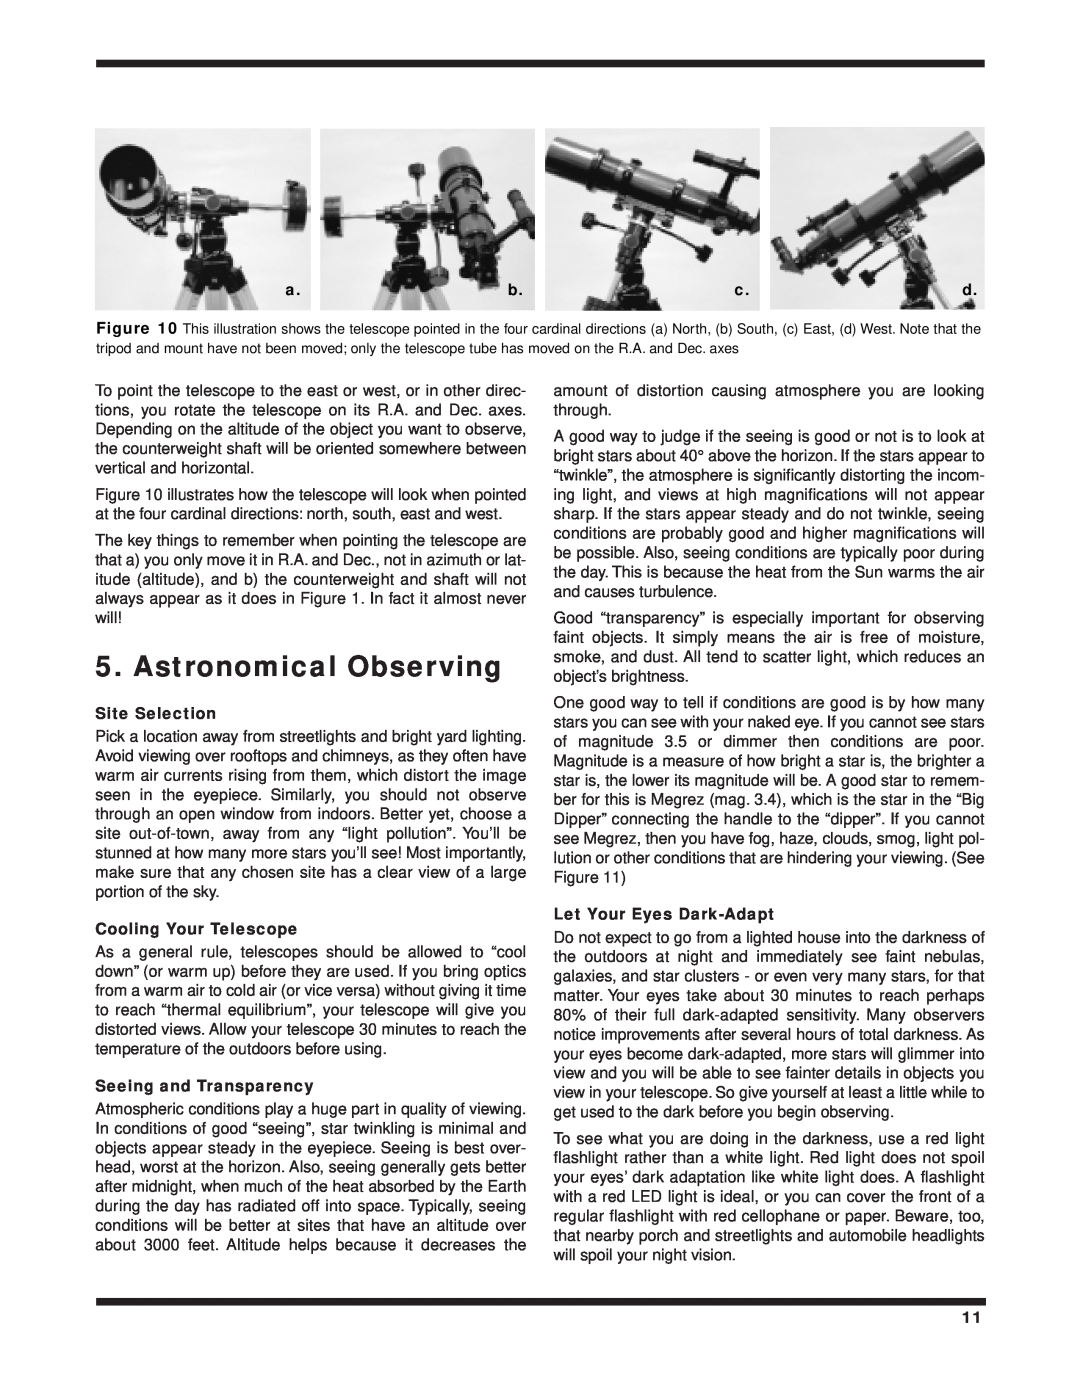 Orion 100 EQ instruction manual Astronomical Observing, Site Selection, Cooling Your Telescope, Seeing and Transparency 